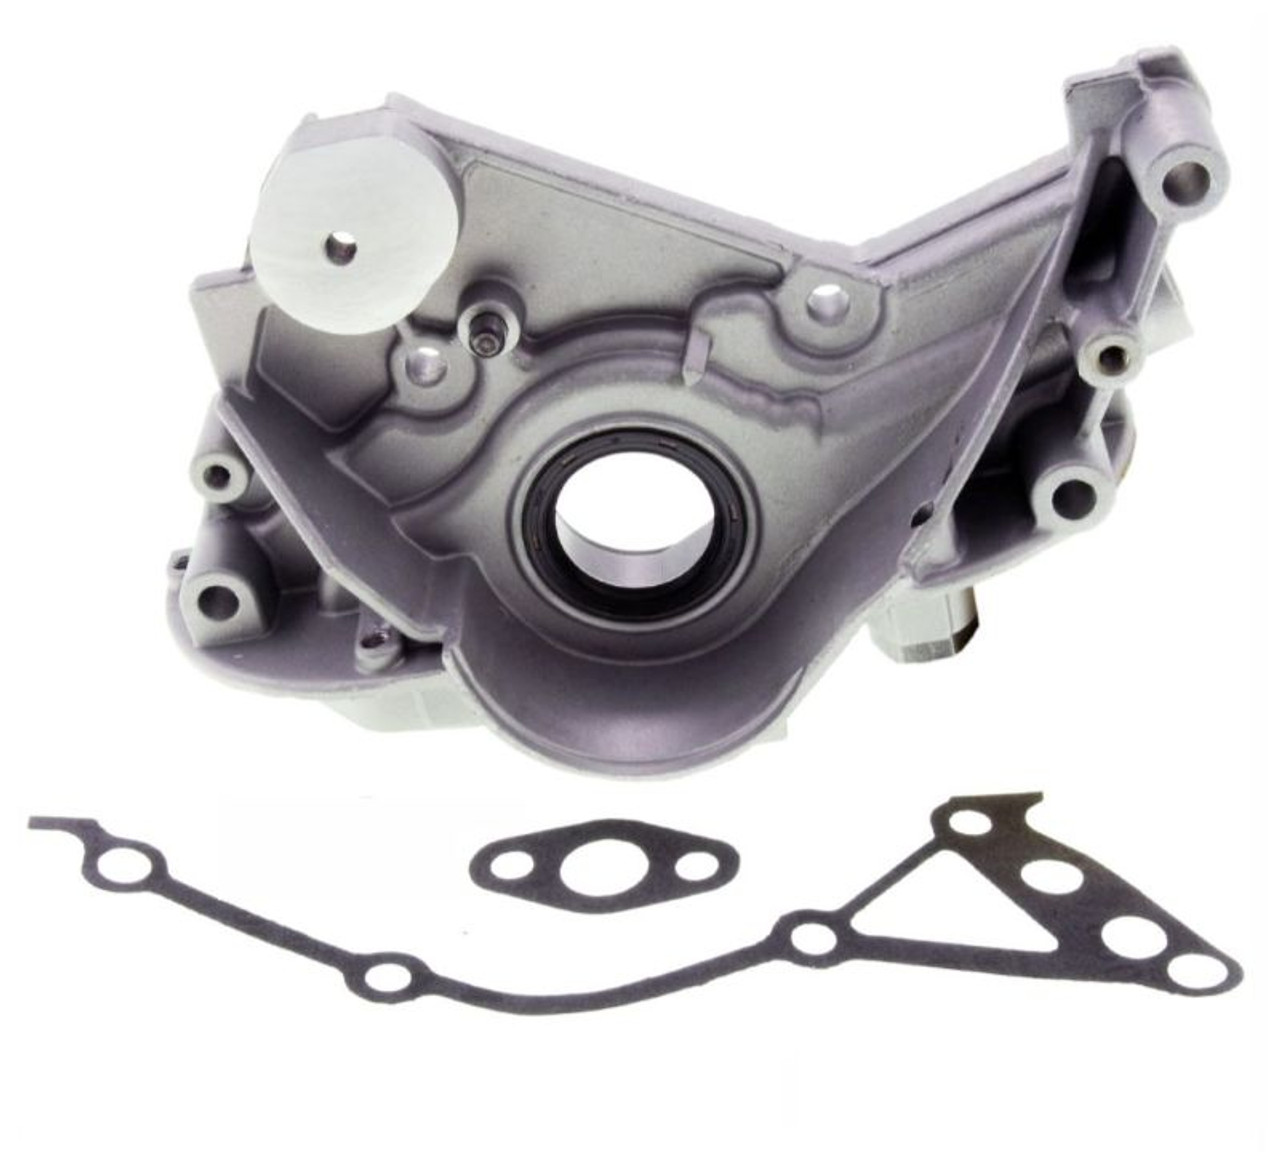 1987 Plymouth Voyager 3.0L Engine Oil Pump EPK129 -5